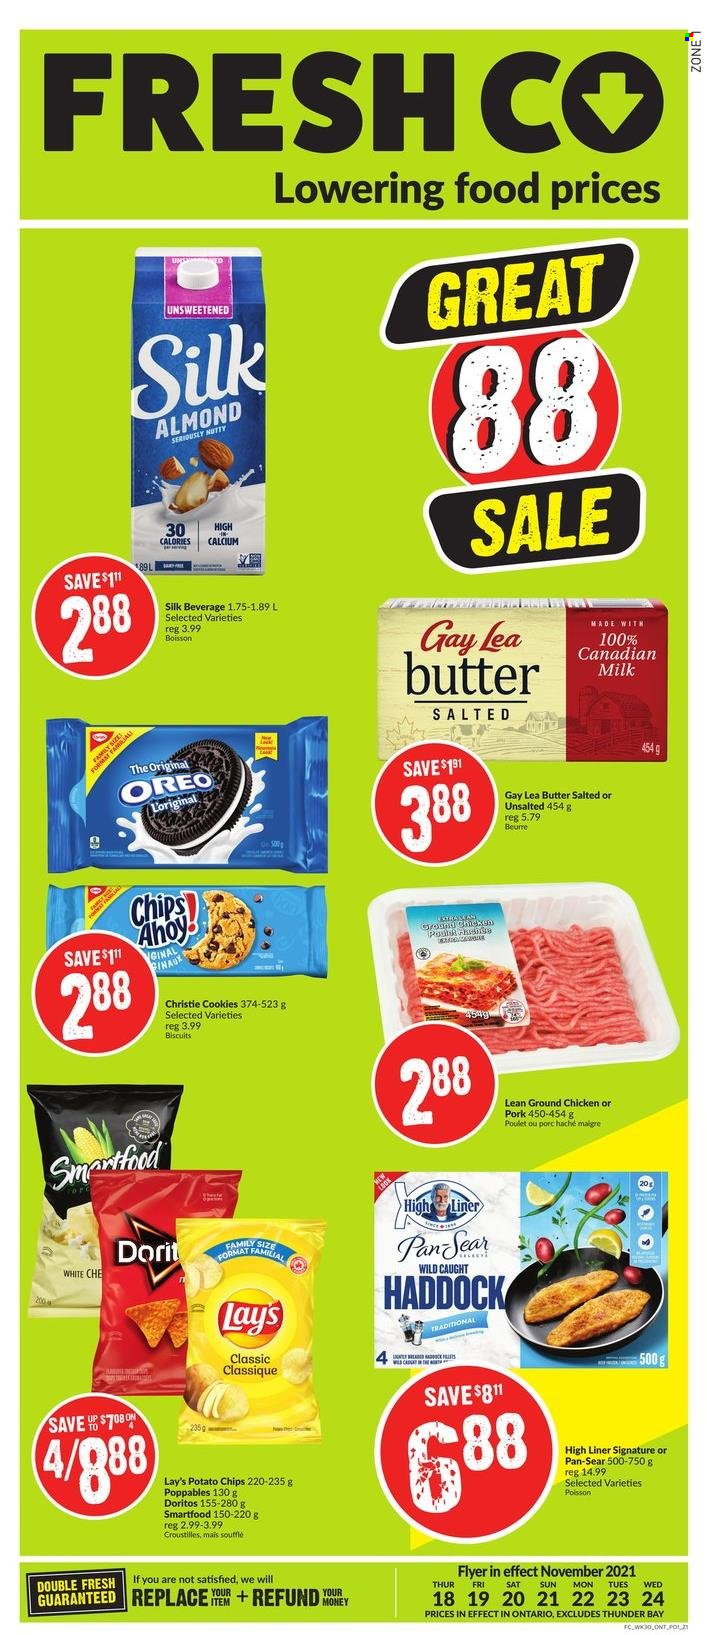 thumbnail - Circulaire FreshCo. - 18 Novembre 2021 - 24 Novembre 2021 - Produits soldés - poulet, Oreo, biscuits, cookies, chips, Lay’s, haddock. Page 1.